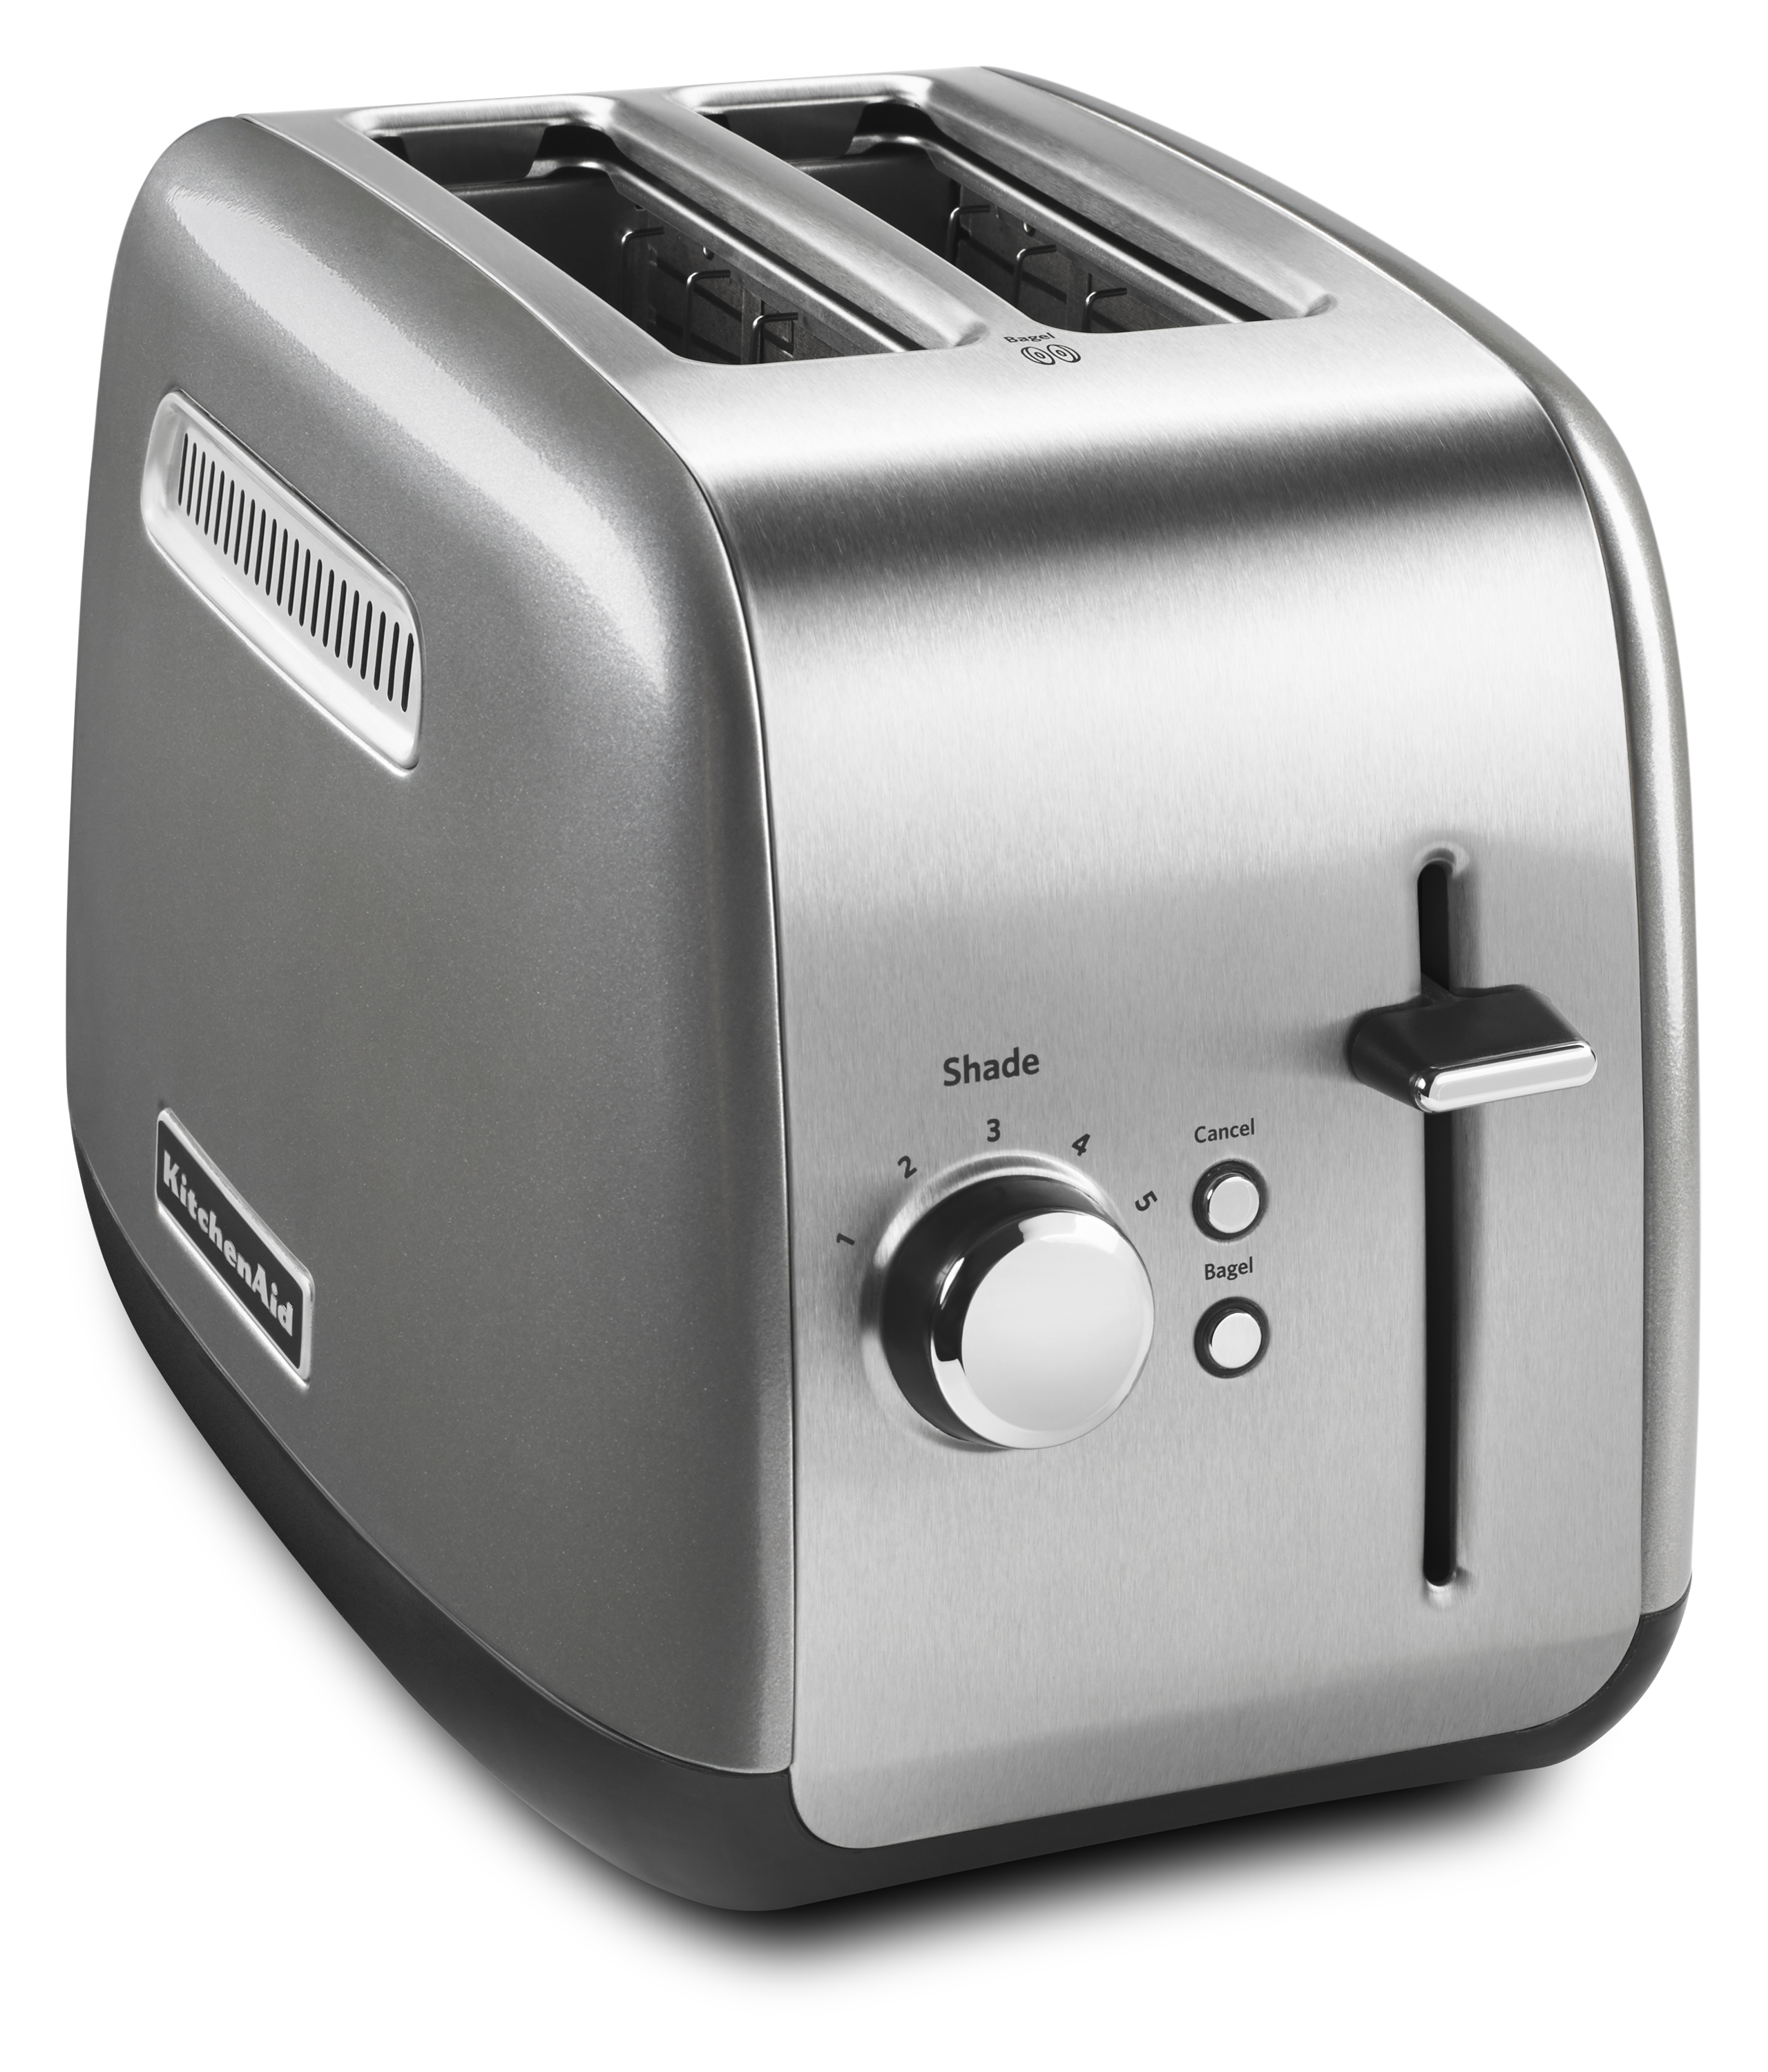 KitchenAid 2-Slice Toaster with Manual Lift Lever, Contour Silver, KMT2115 - image 1 of 9